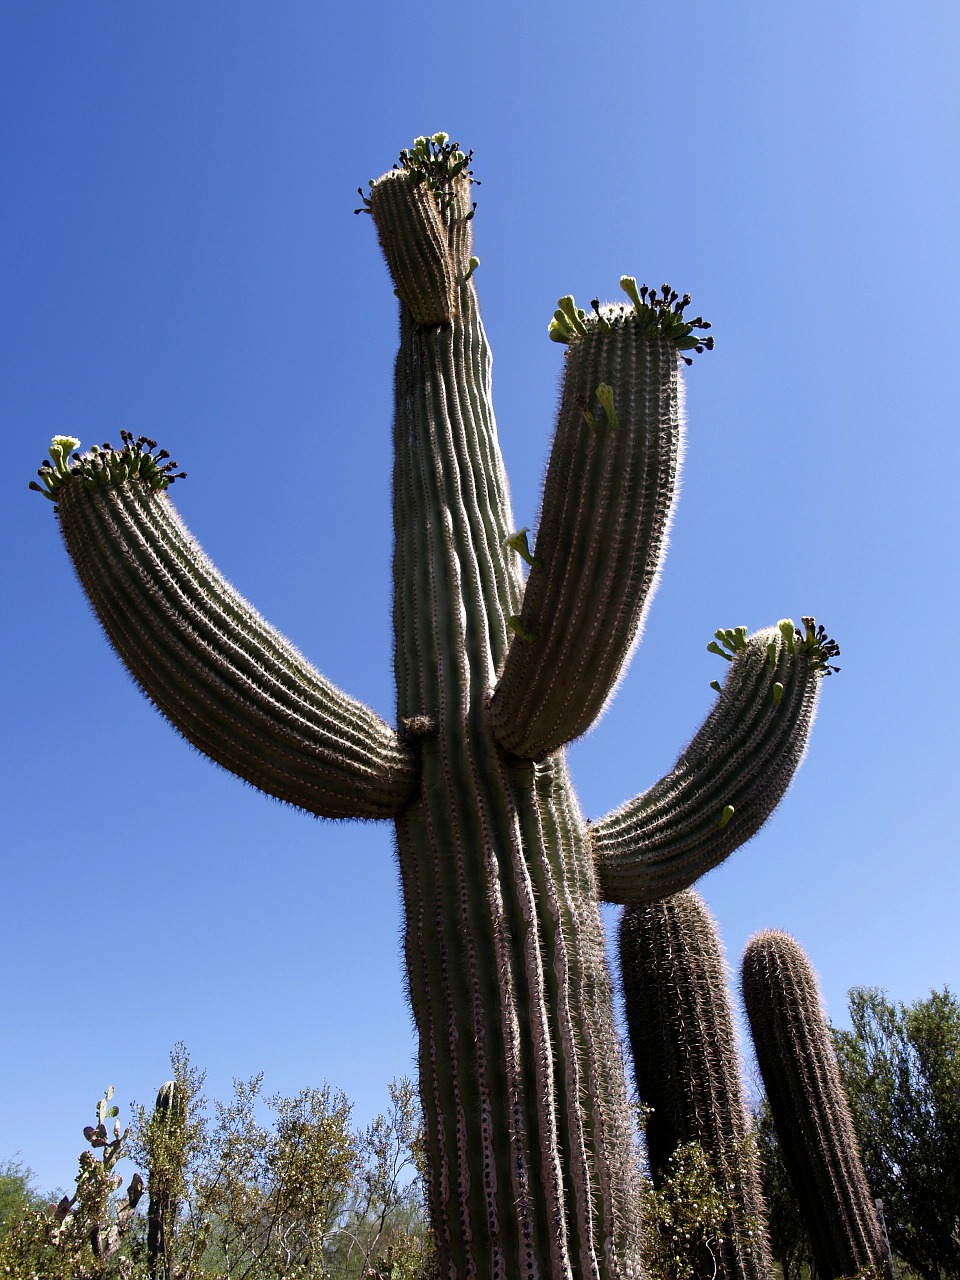 cactus,giant,desert,blue,sky,nature,plant,free pictures, free photos, free images, royalty free, free illustrations, public domain